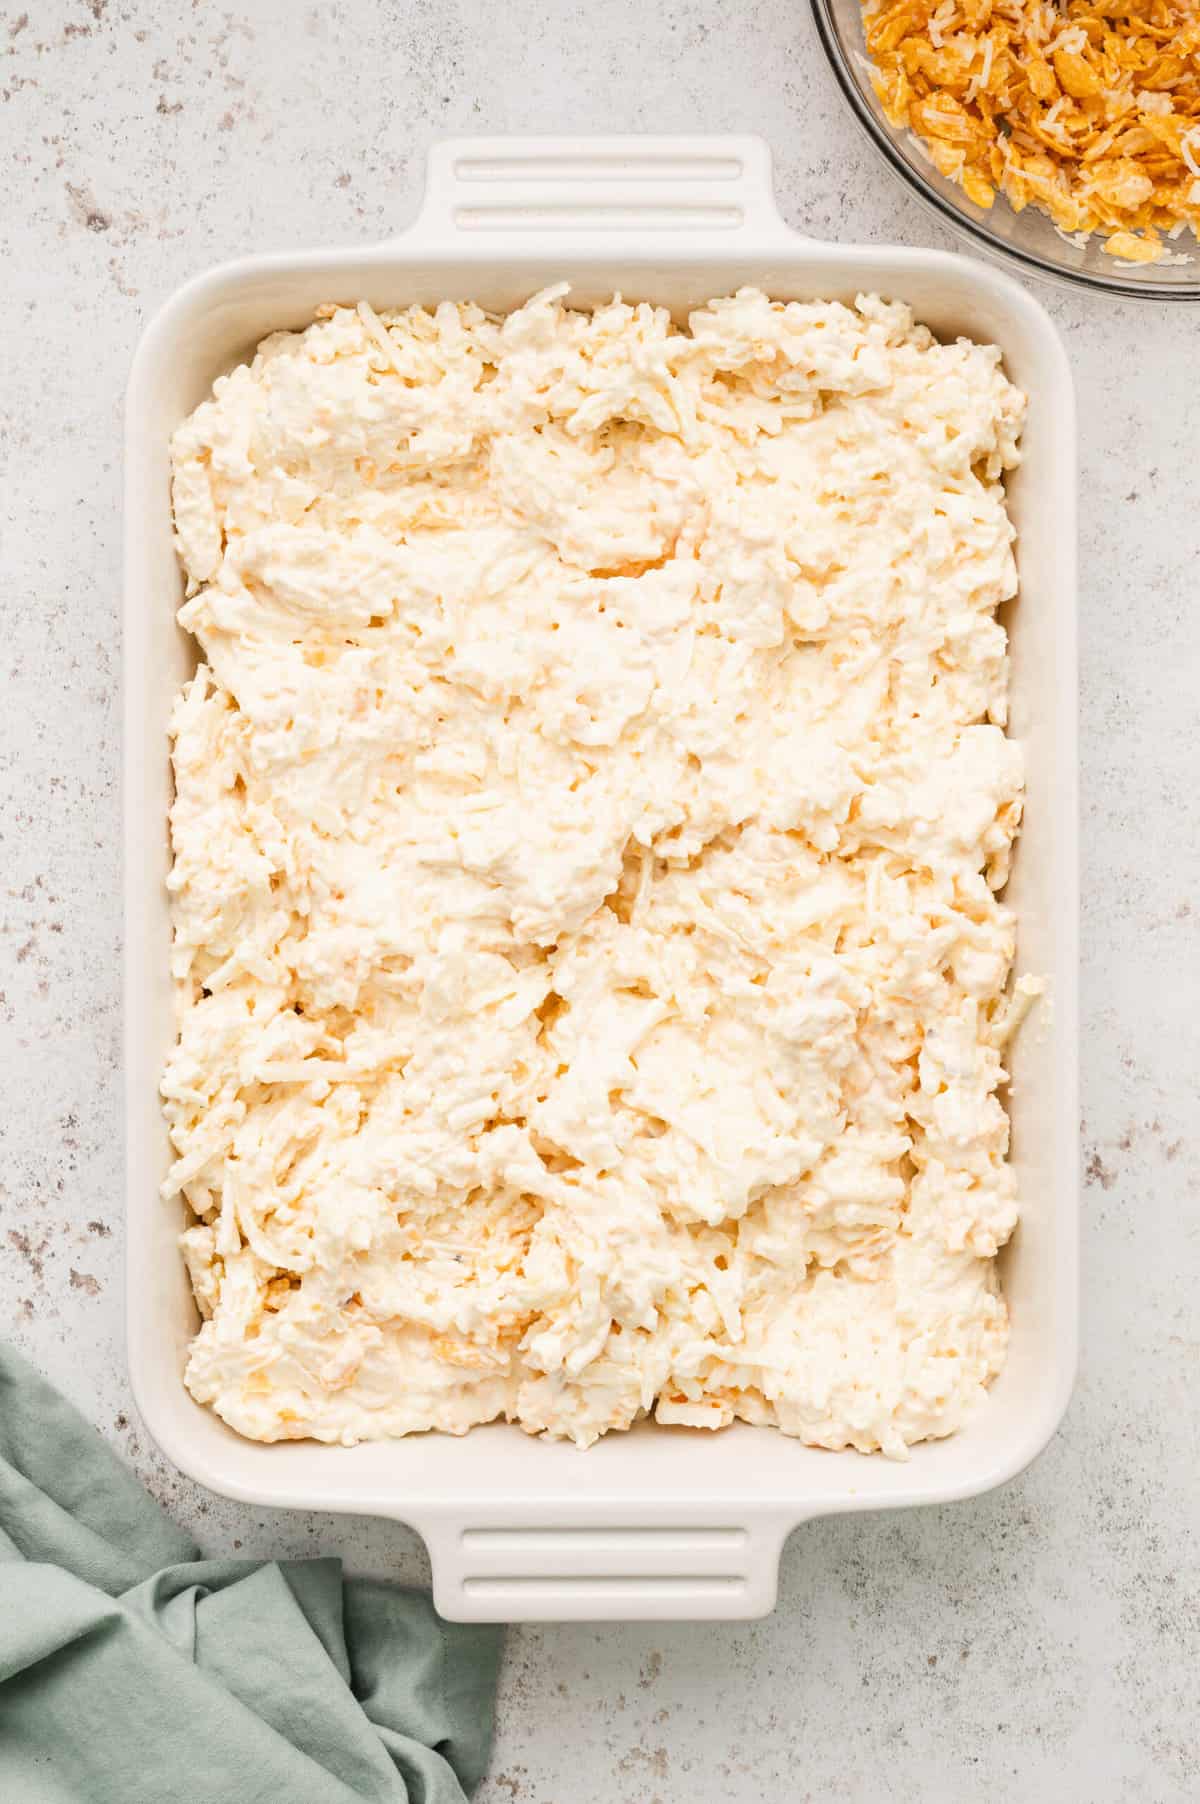 Evenly spreading potatoe mixture in 9x13 baking dish for Cornflakes, melted butter, and Parmesan cheese in glass mixing for Funeral Potatoes recipe